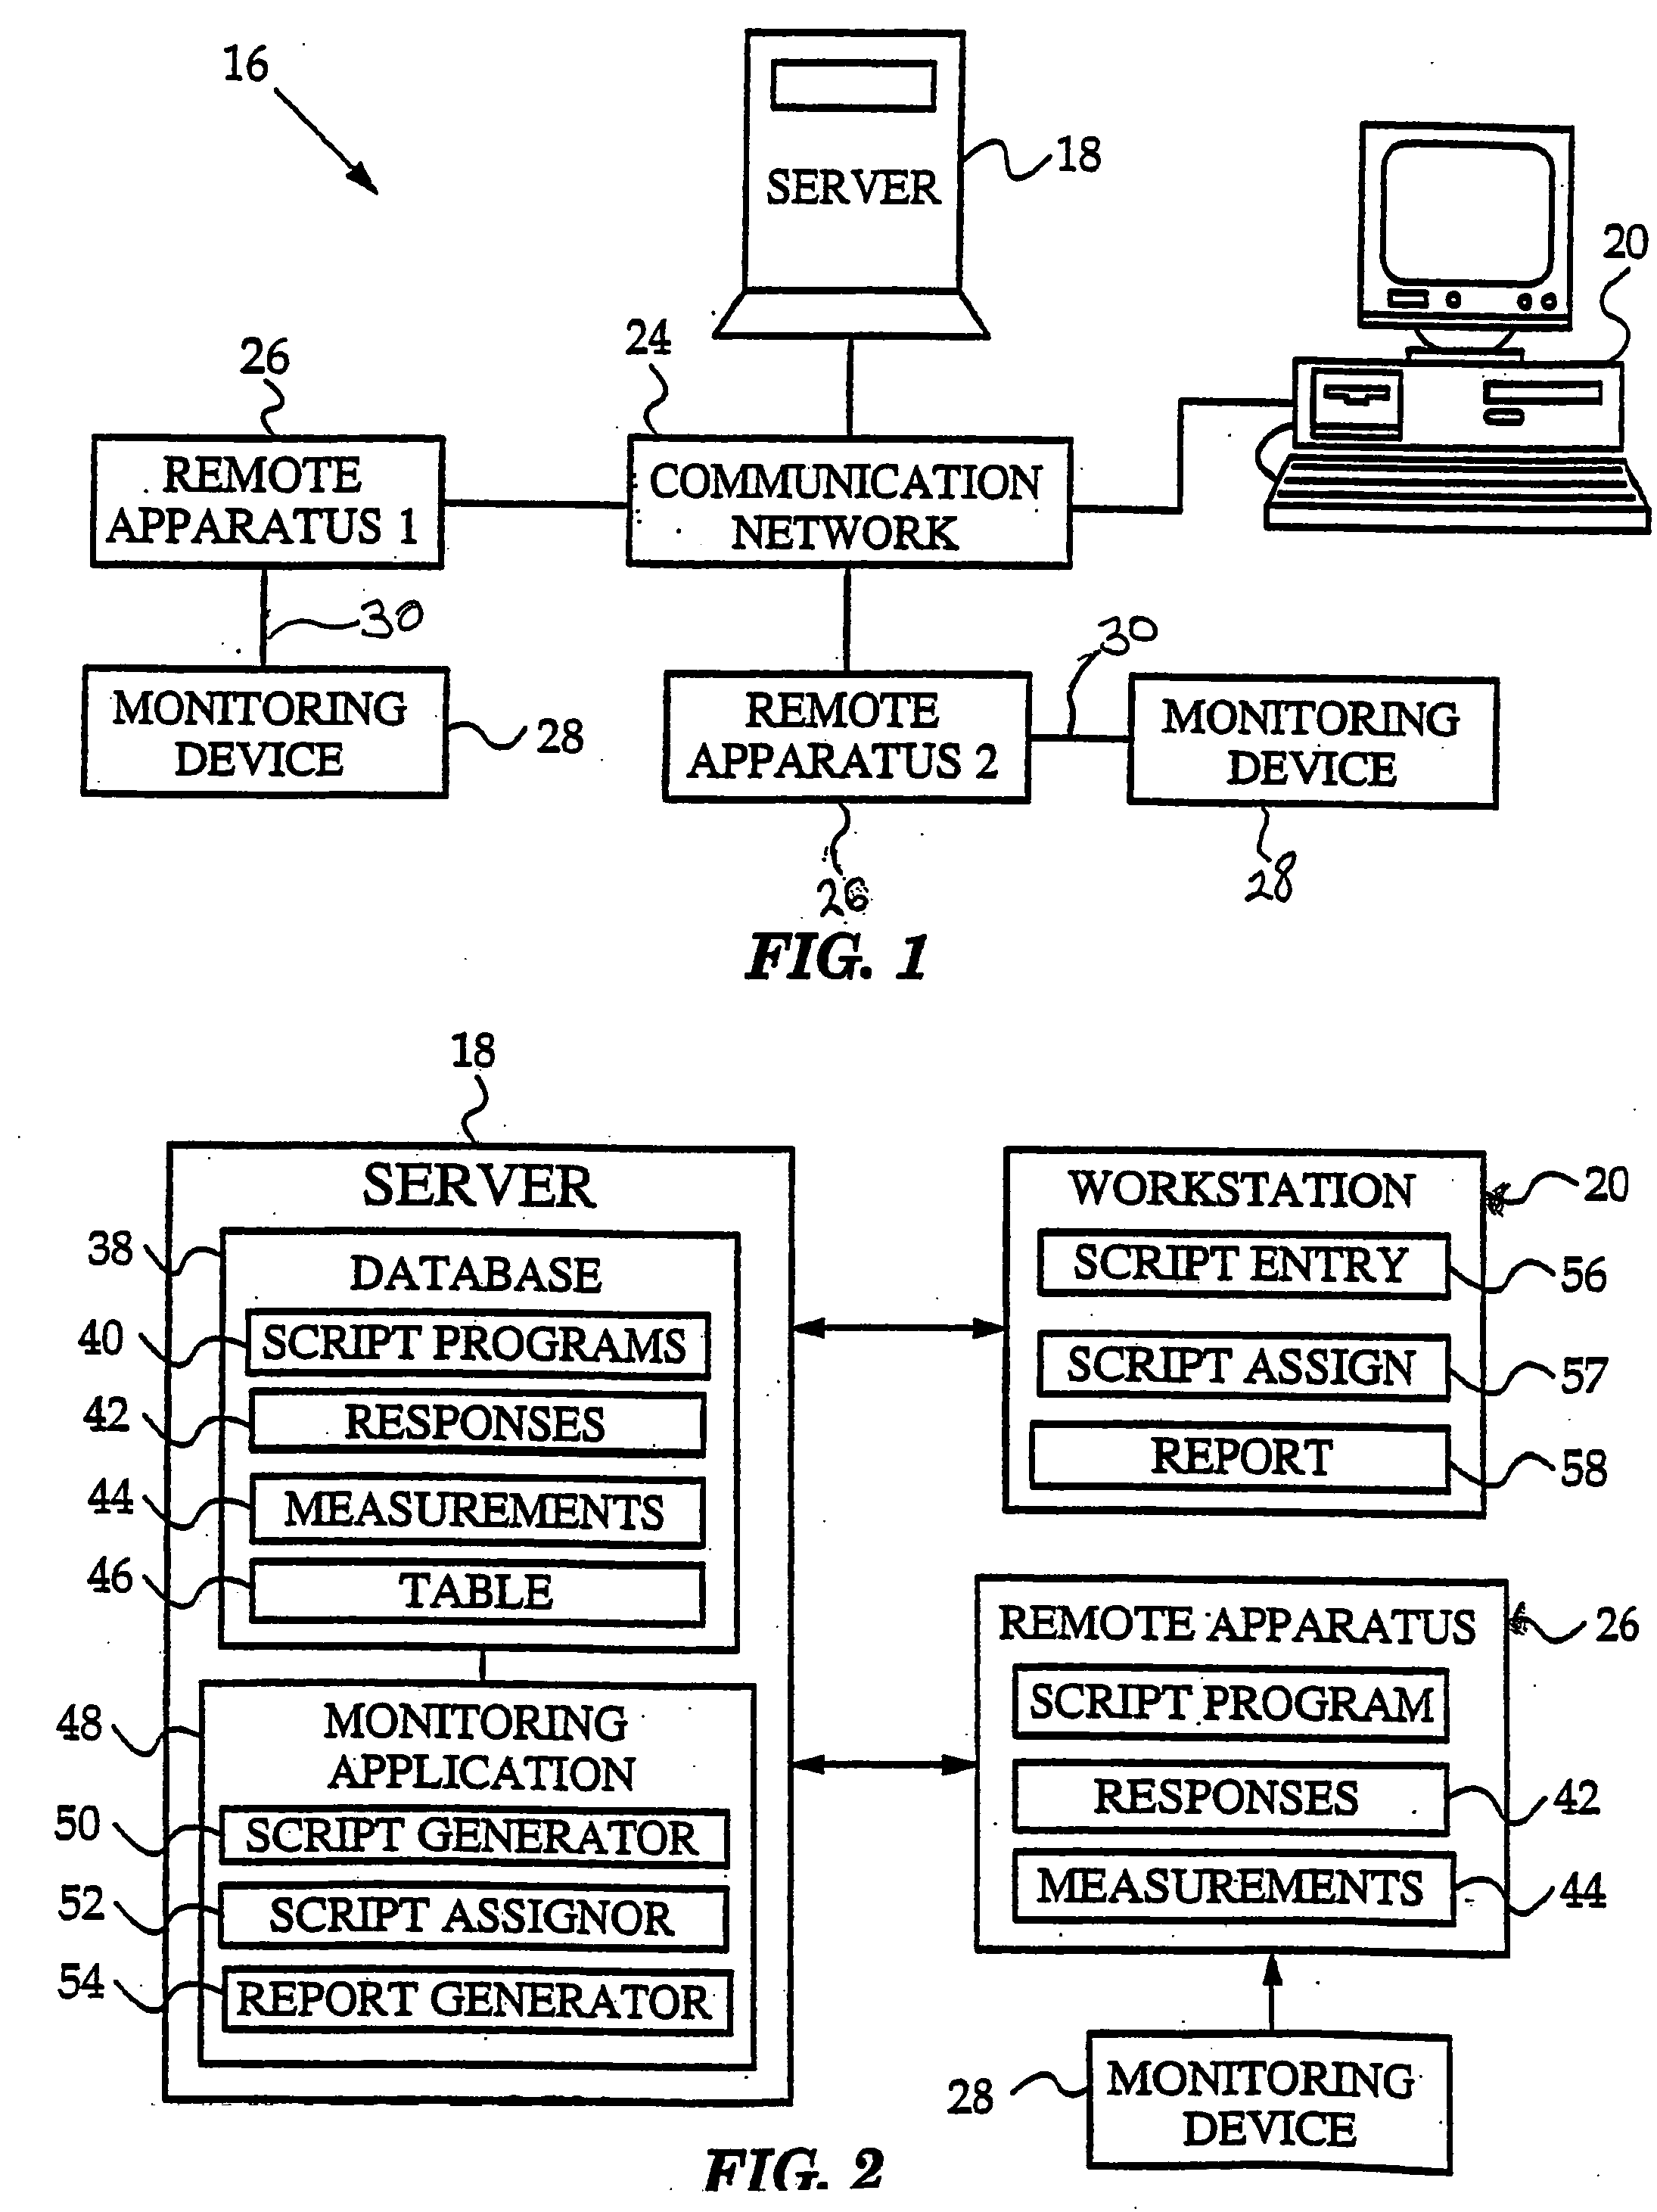 Remote health monitoring apparatus using scripted communications